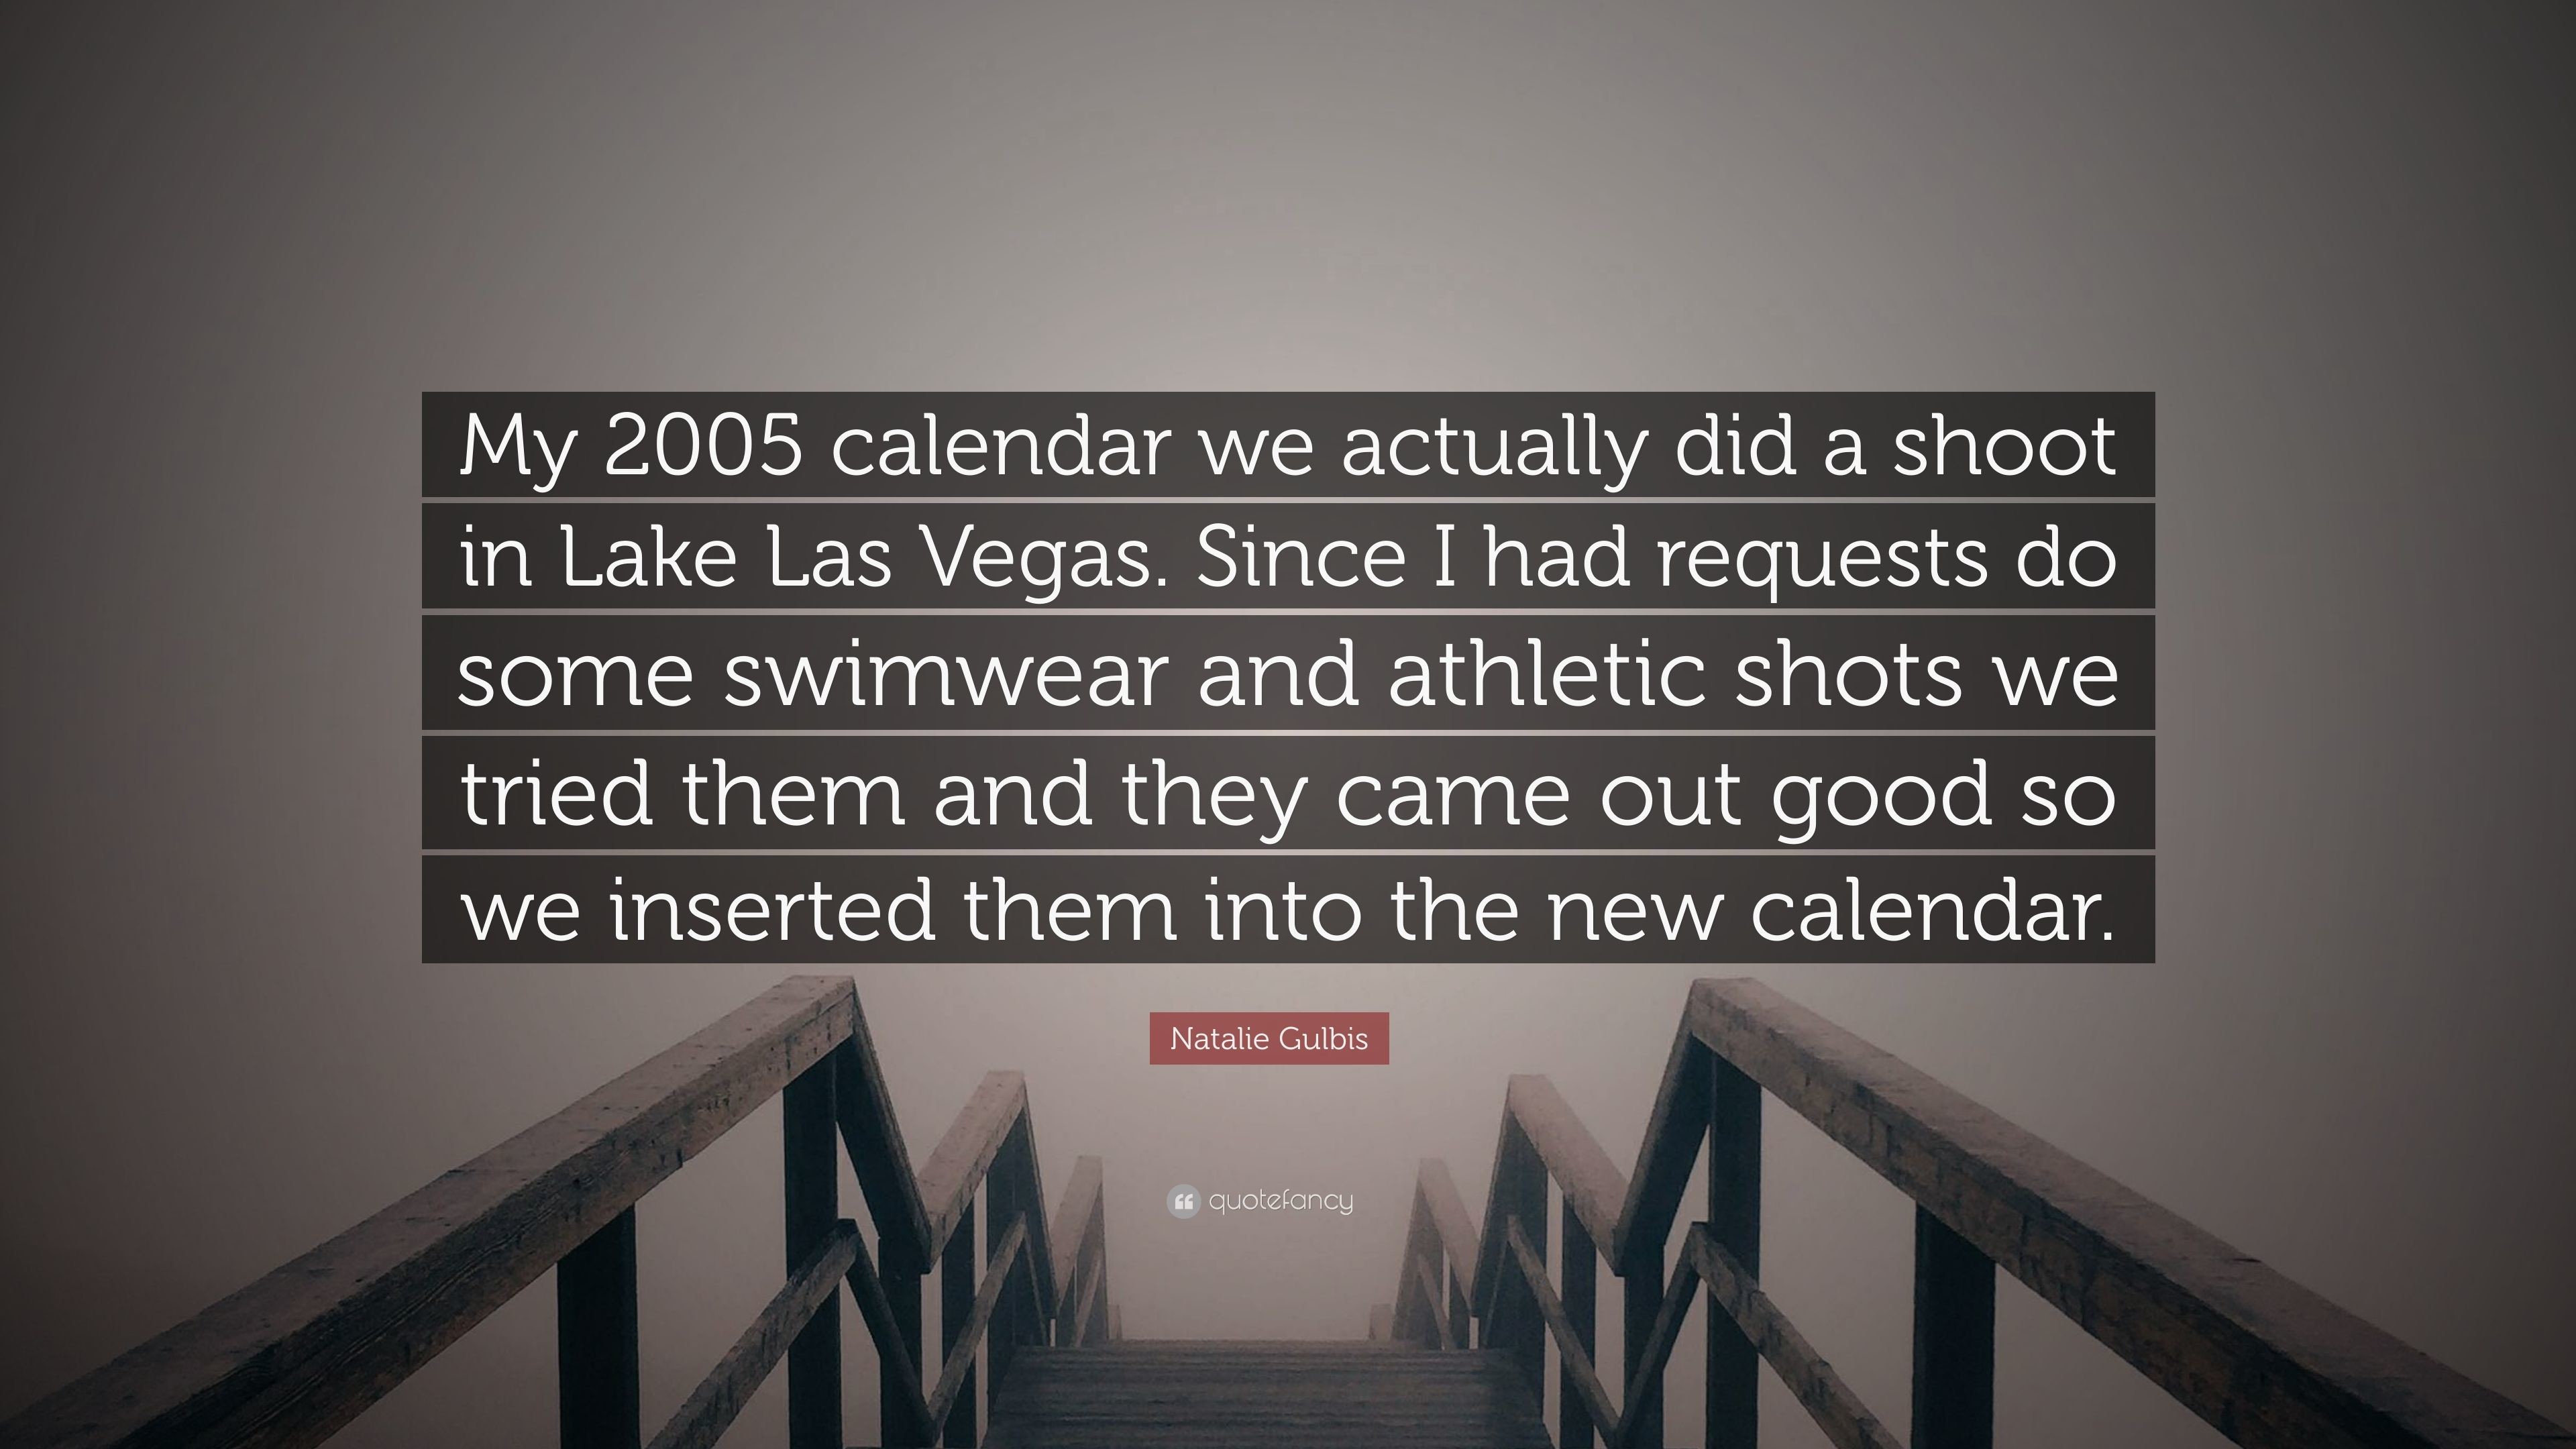 3840x2160 Natalie Gulbis Quote: “My 2005 calendar we actually did a shoot in Lake Las